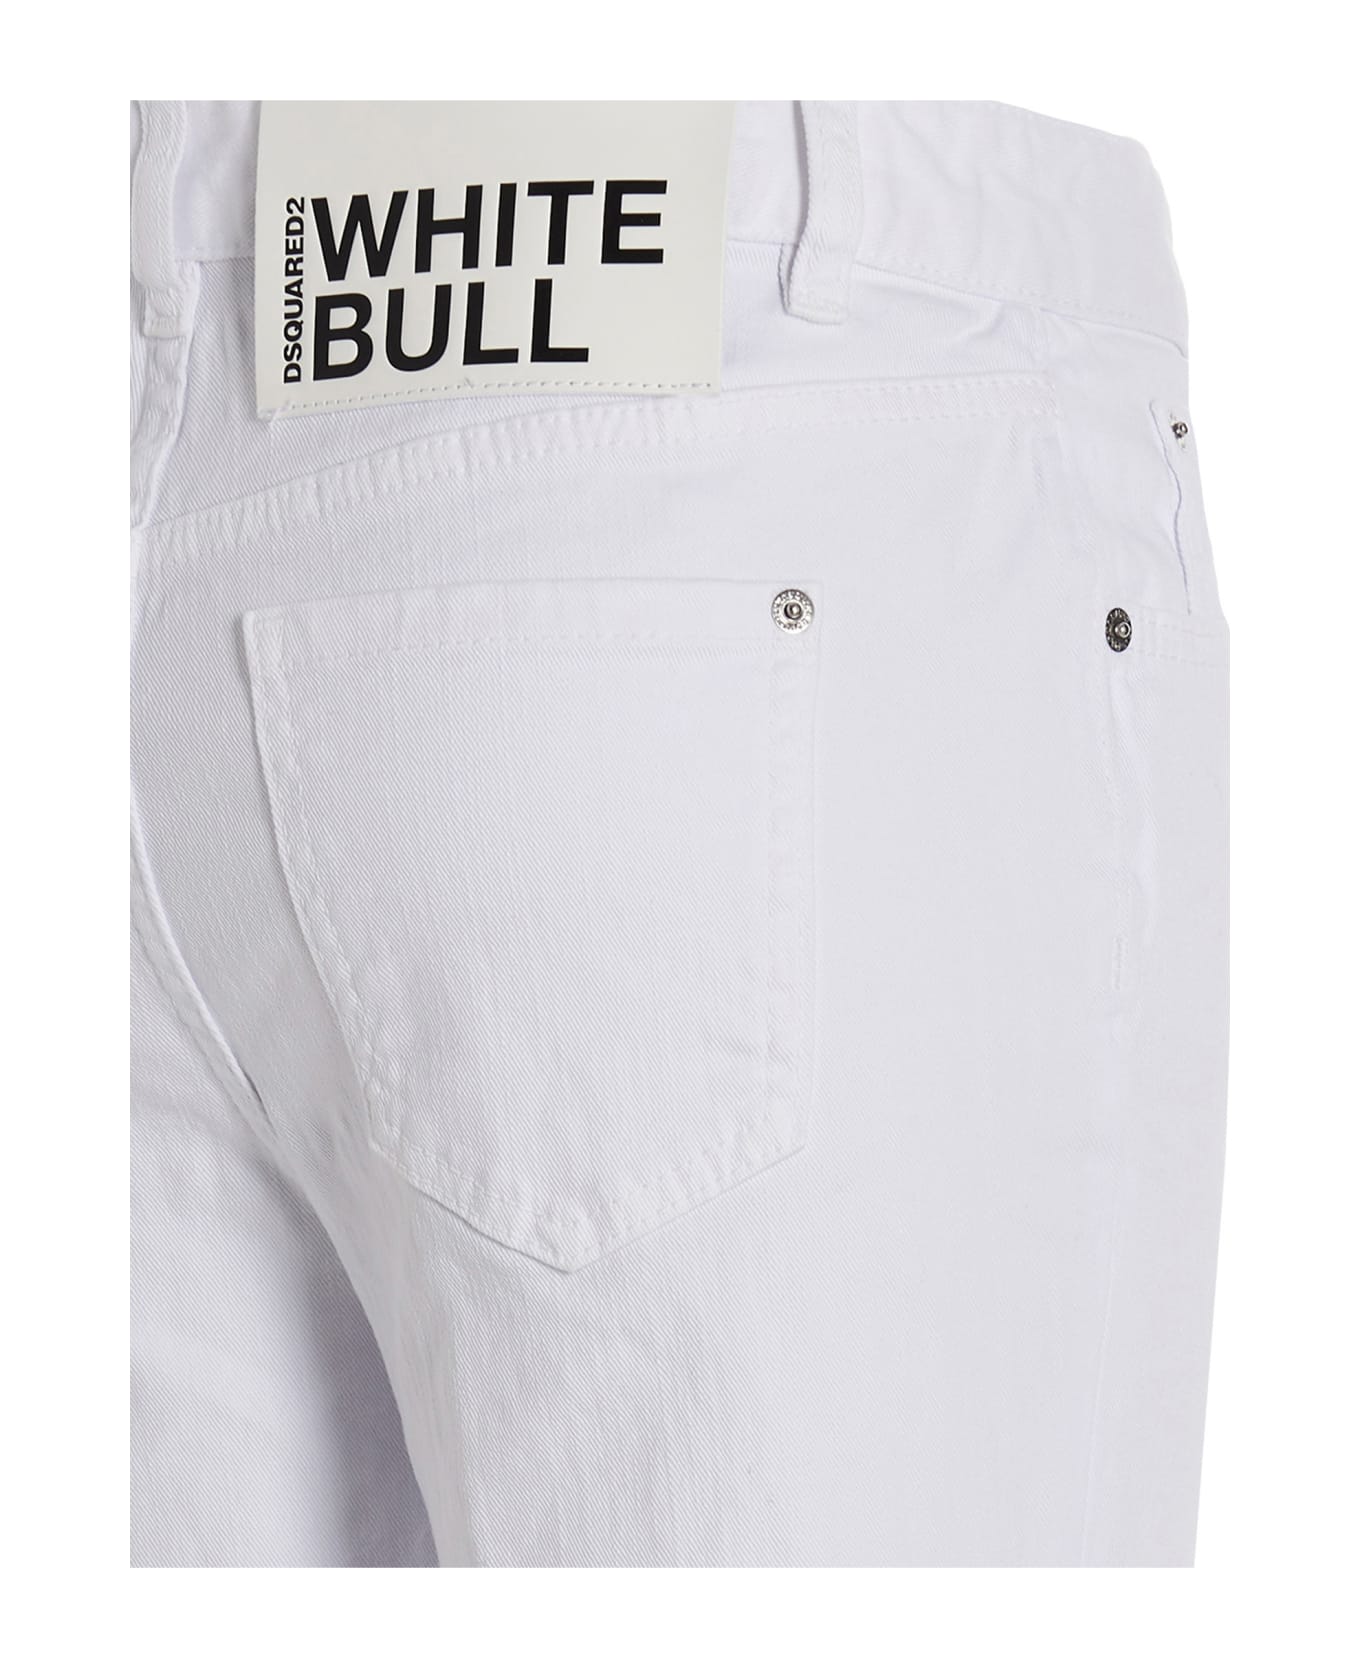 Dsquared2 Jeans 'super Flared Cropped' - White